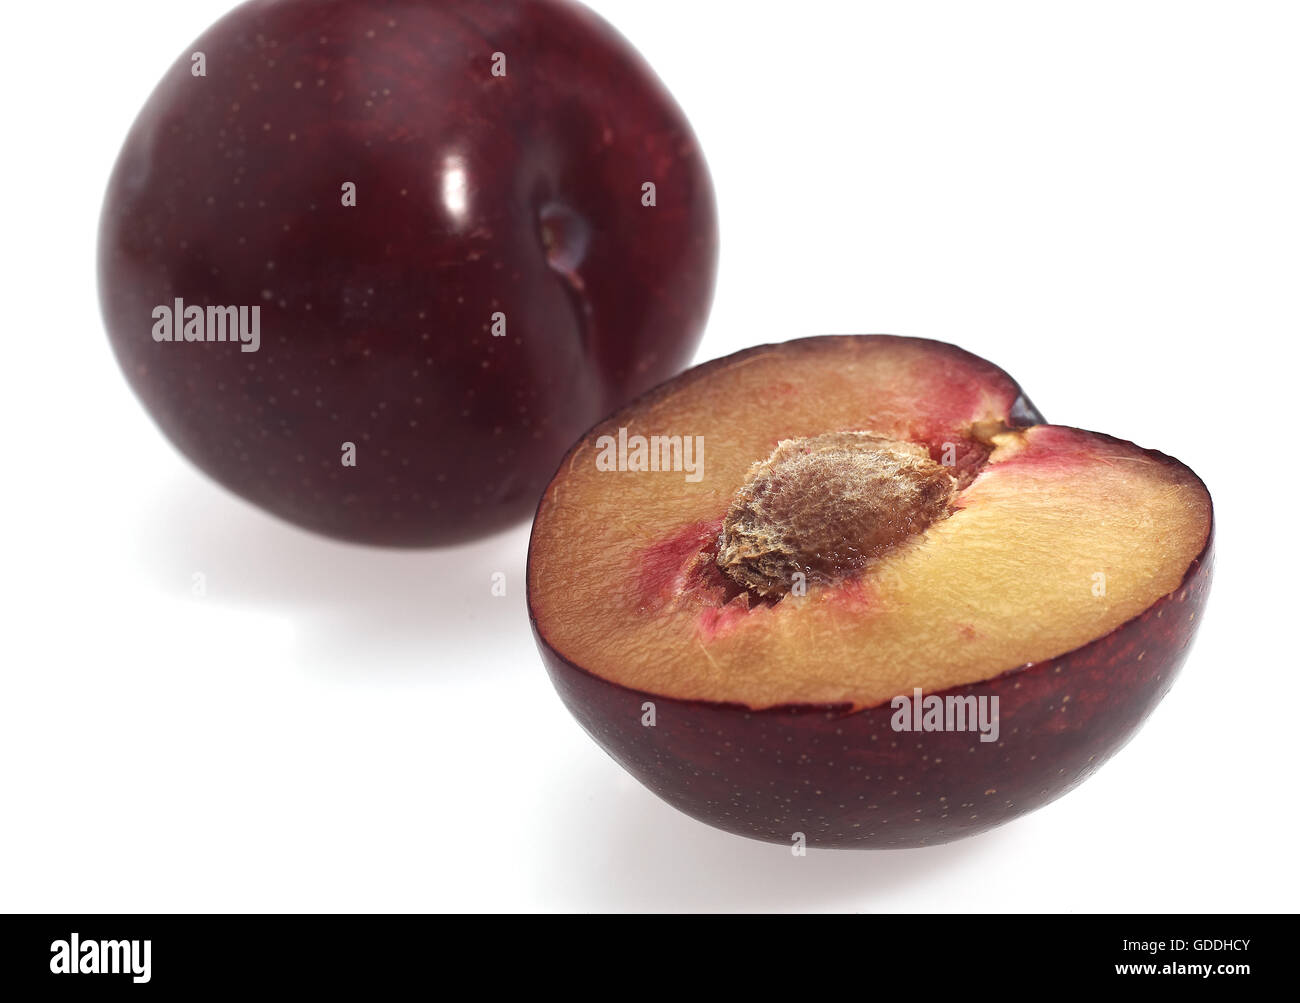 Red Plums, prunus domestica, Fruits against White Background Stock Photo